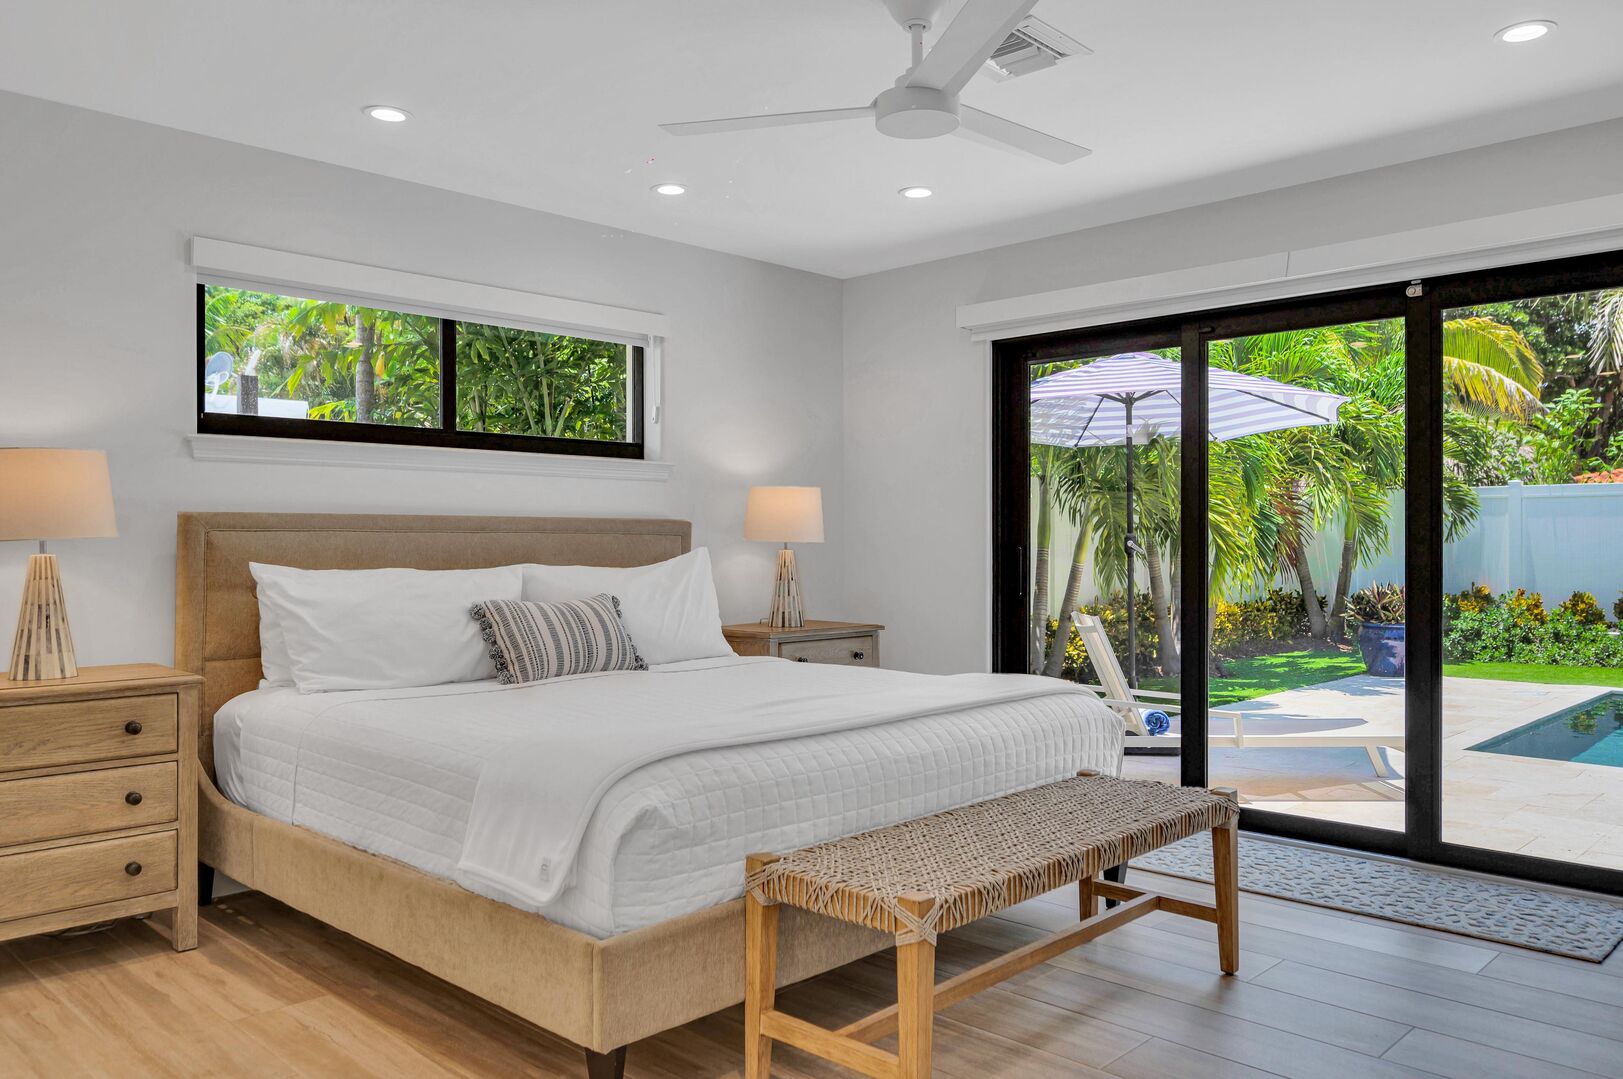 Master Bedroom comes with a King-sized bed, master bathroom and pool access.